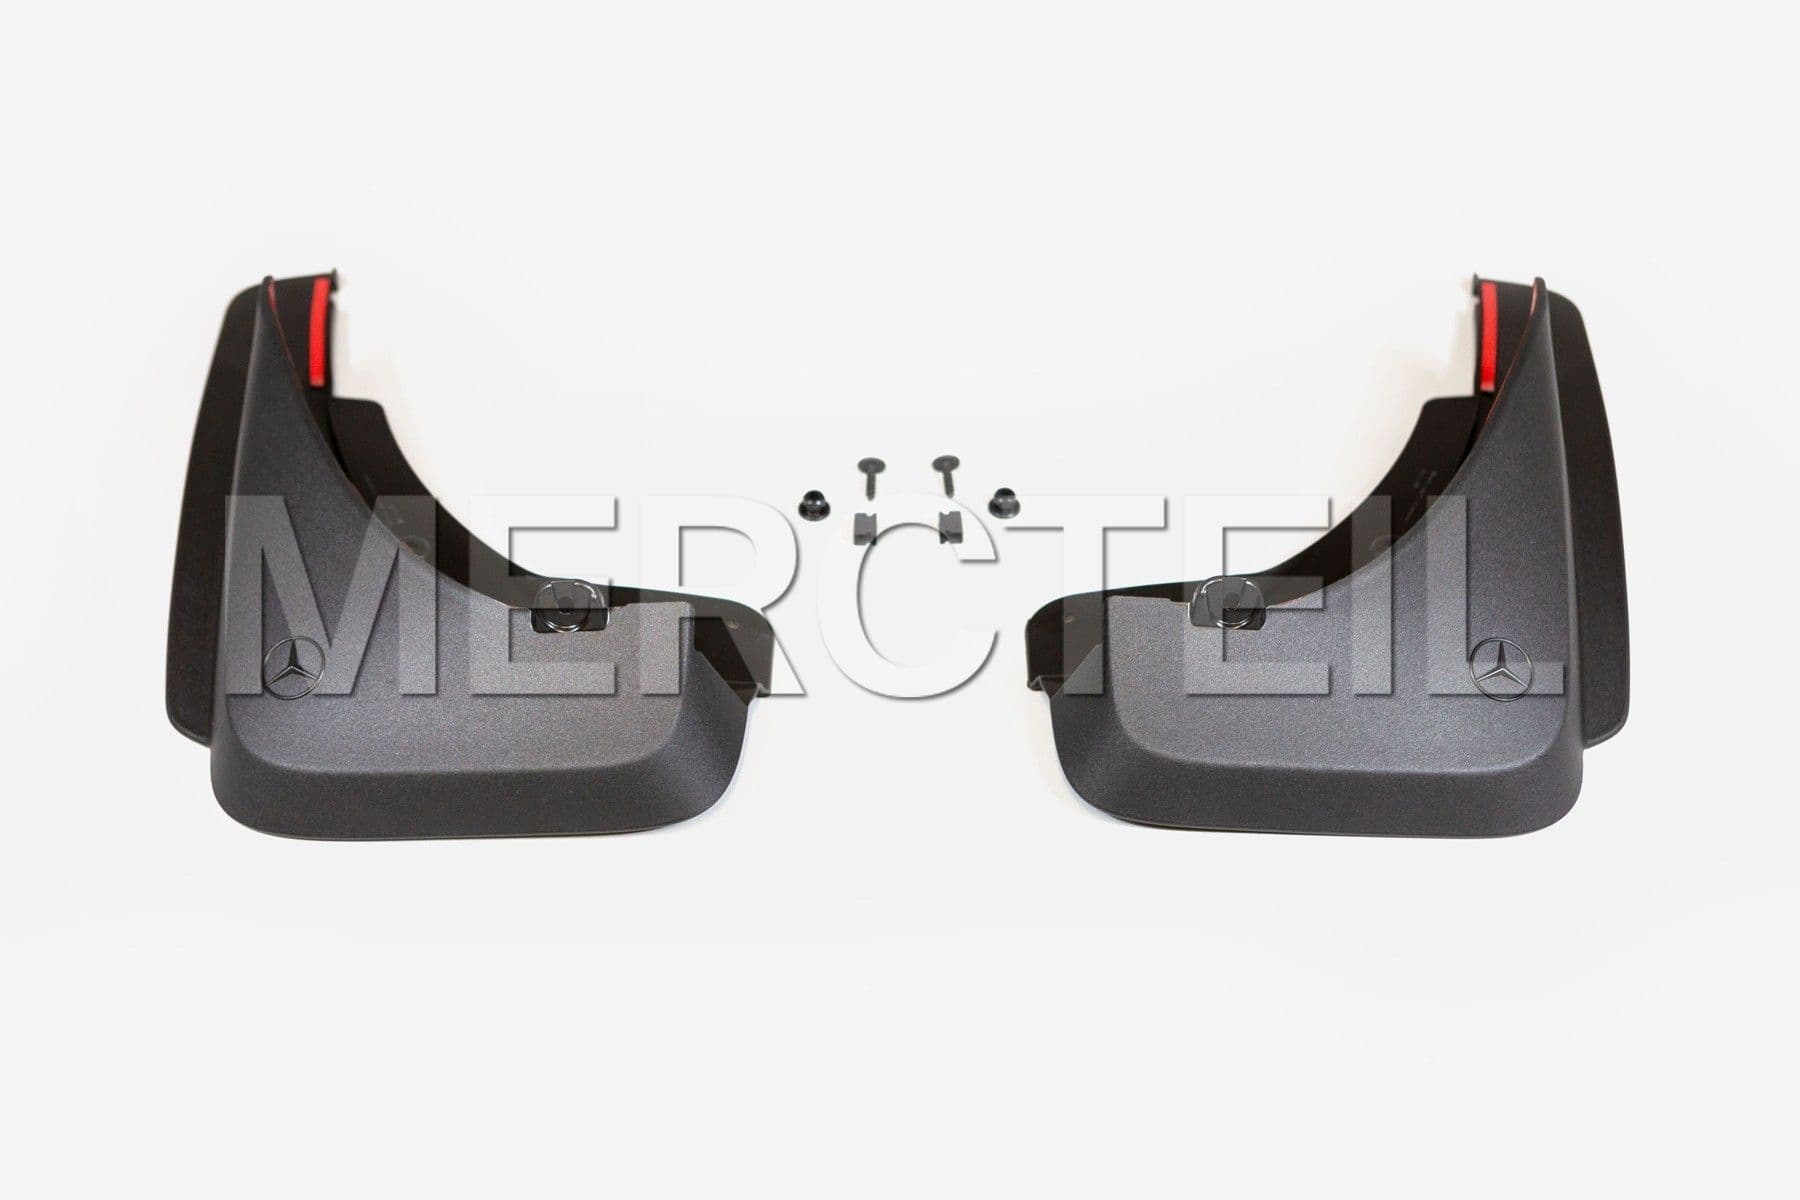 Mud Flaps Kit for GLS Class X167 Genuine Mercedes Benz (part number: A1678903400)